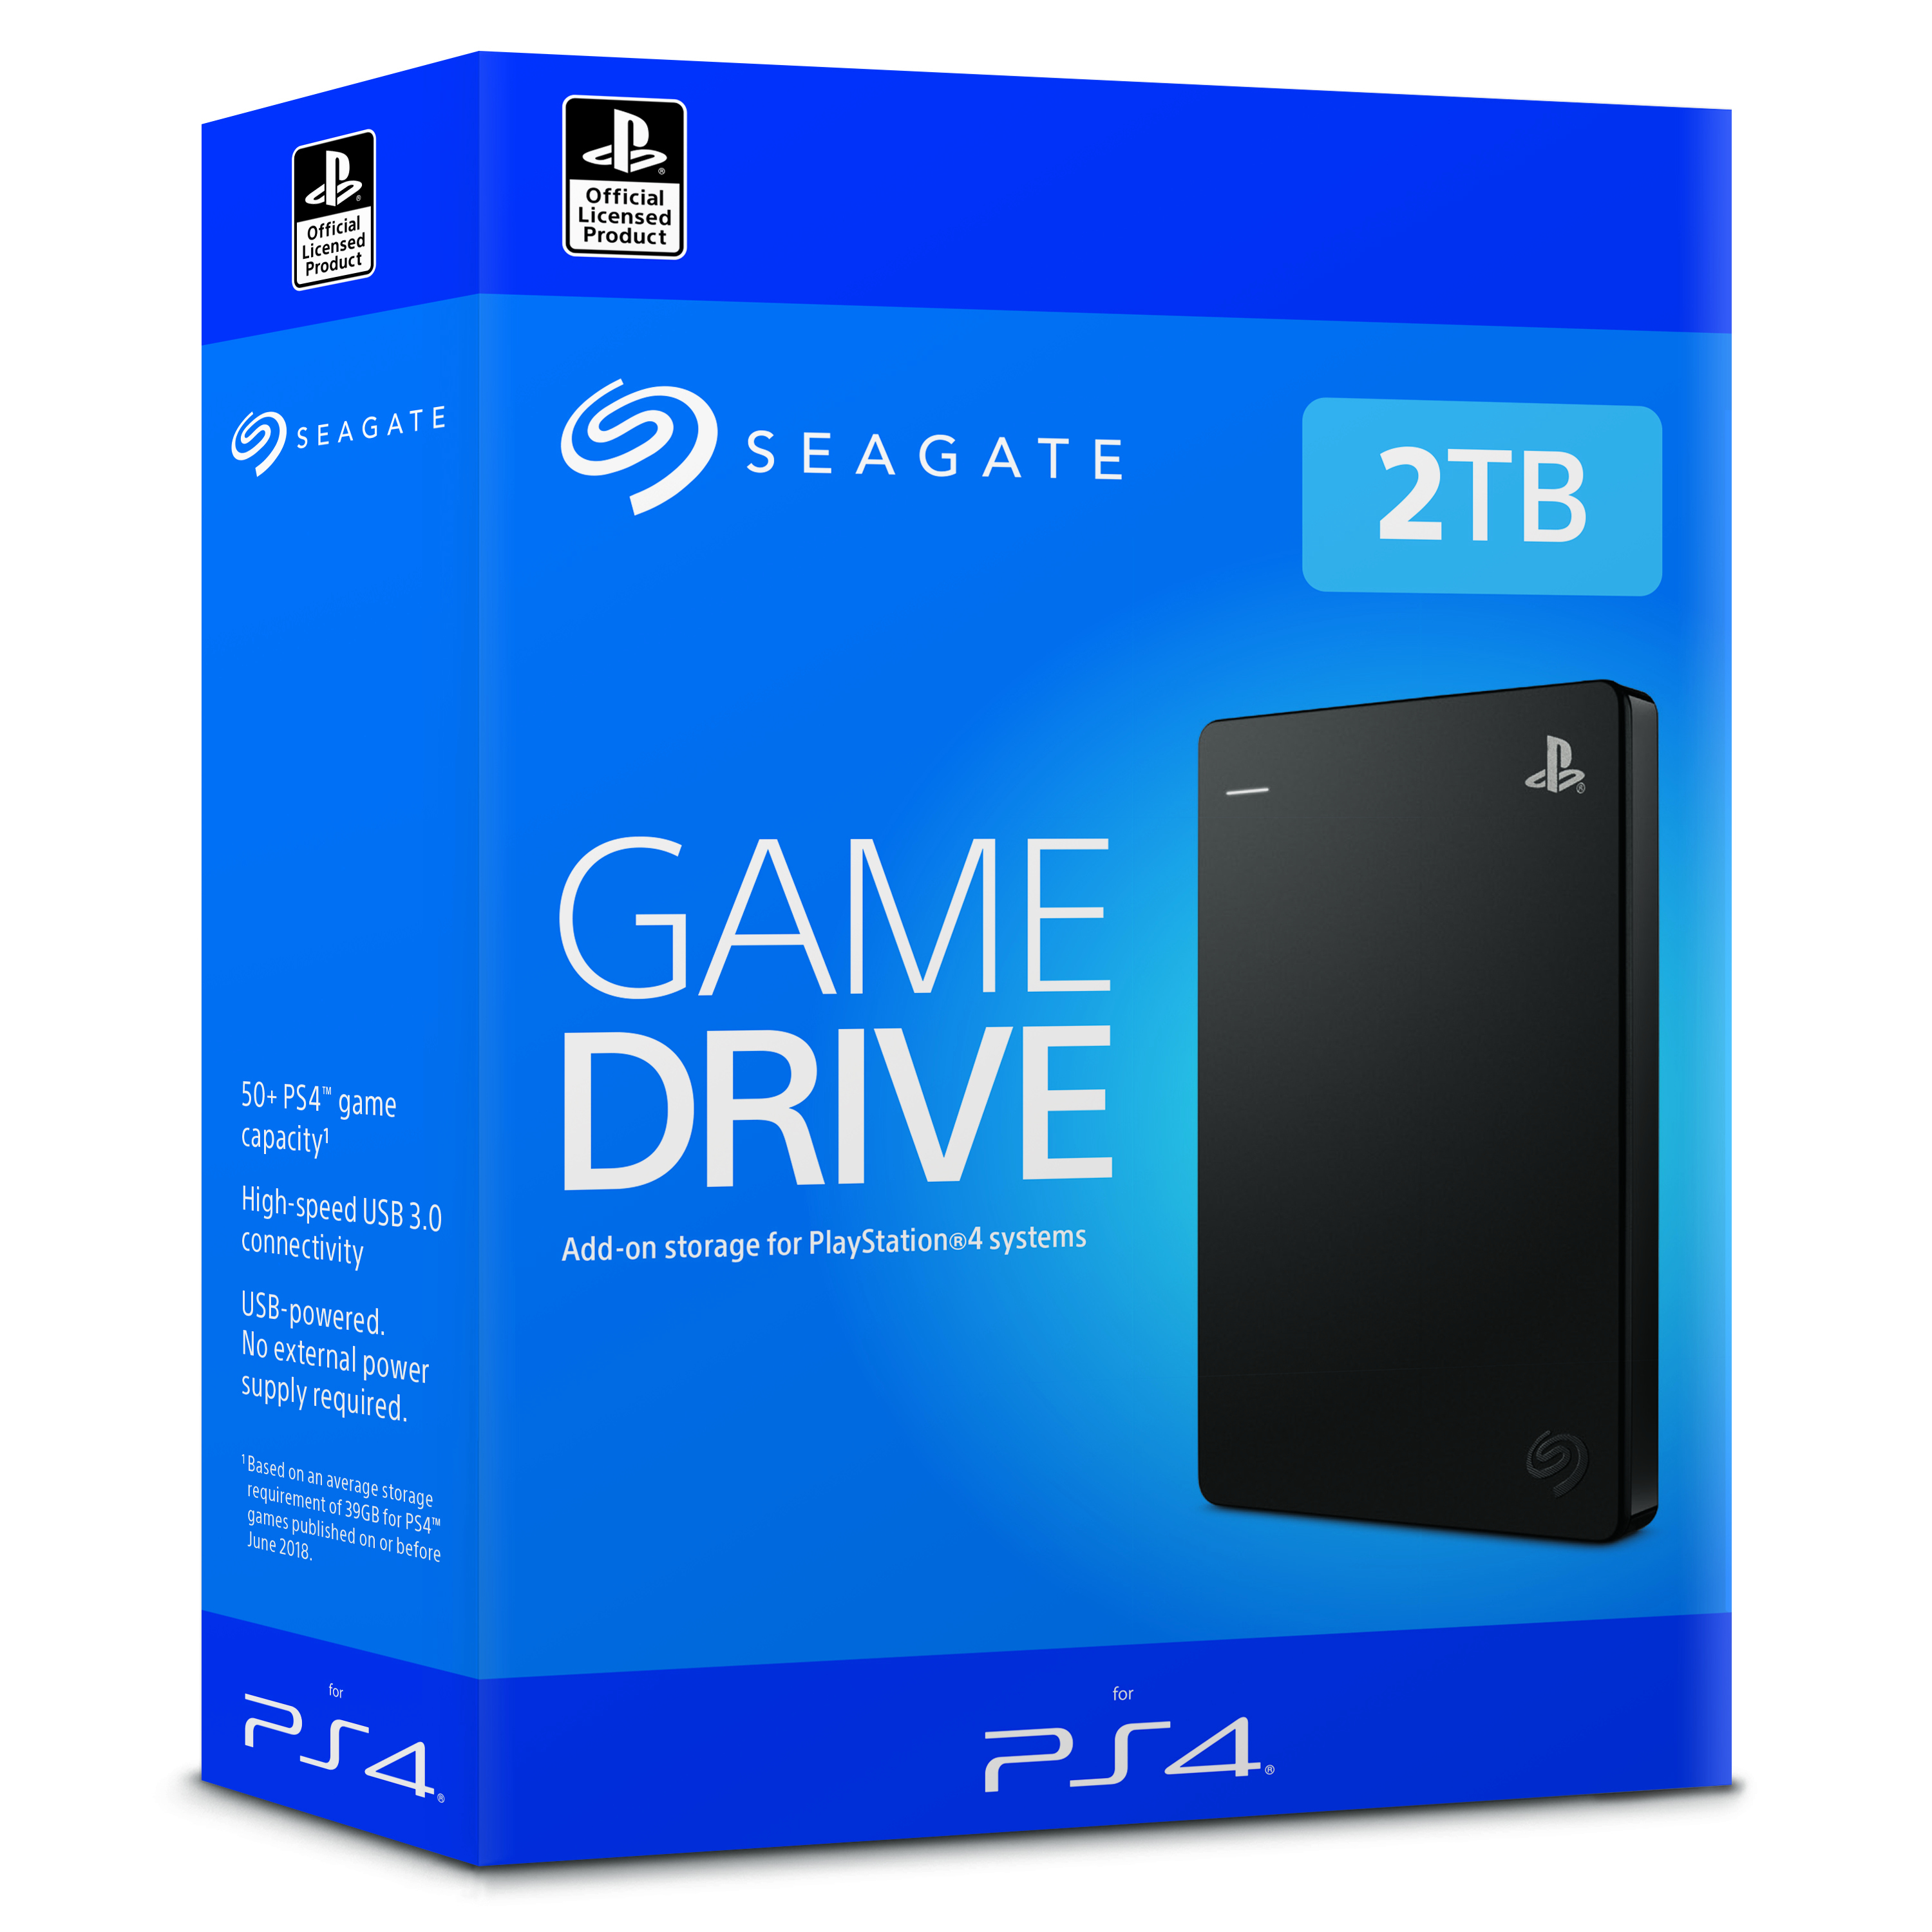 Seagate STGD2000200 | Seagate - Game - for Drive PS4 - extern (tragbar) TB STGD2000200 2 Festplatte